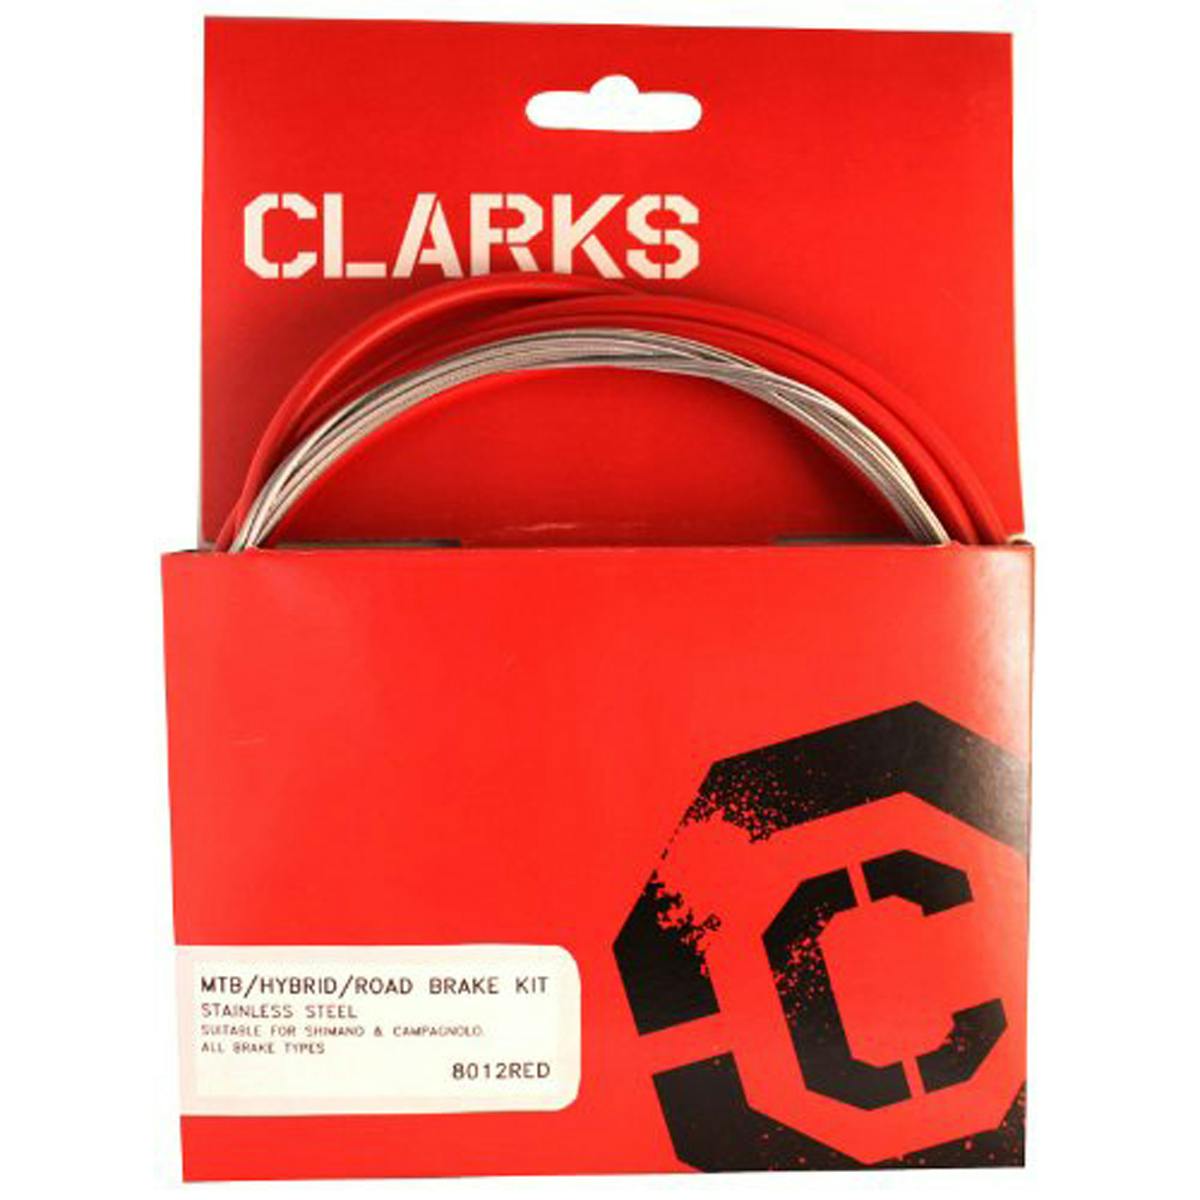 Clarks Stainless Steel Brake Kit Compatible with MTB/Hybrid/Road · Red · 2275mm, Stainless